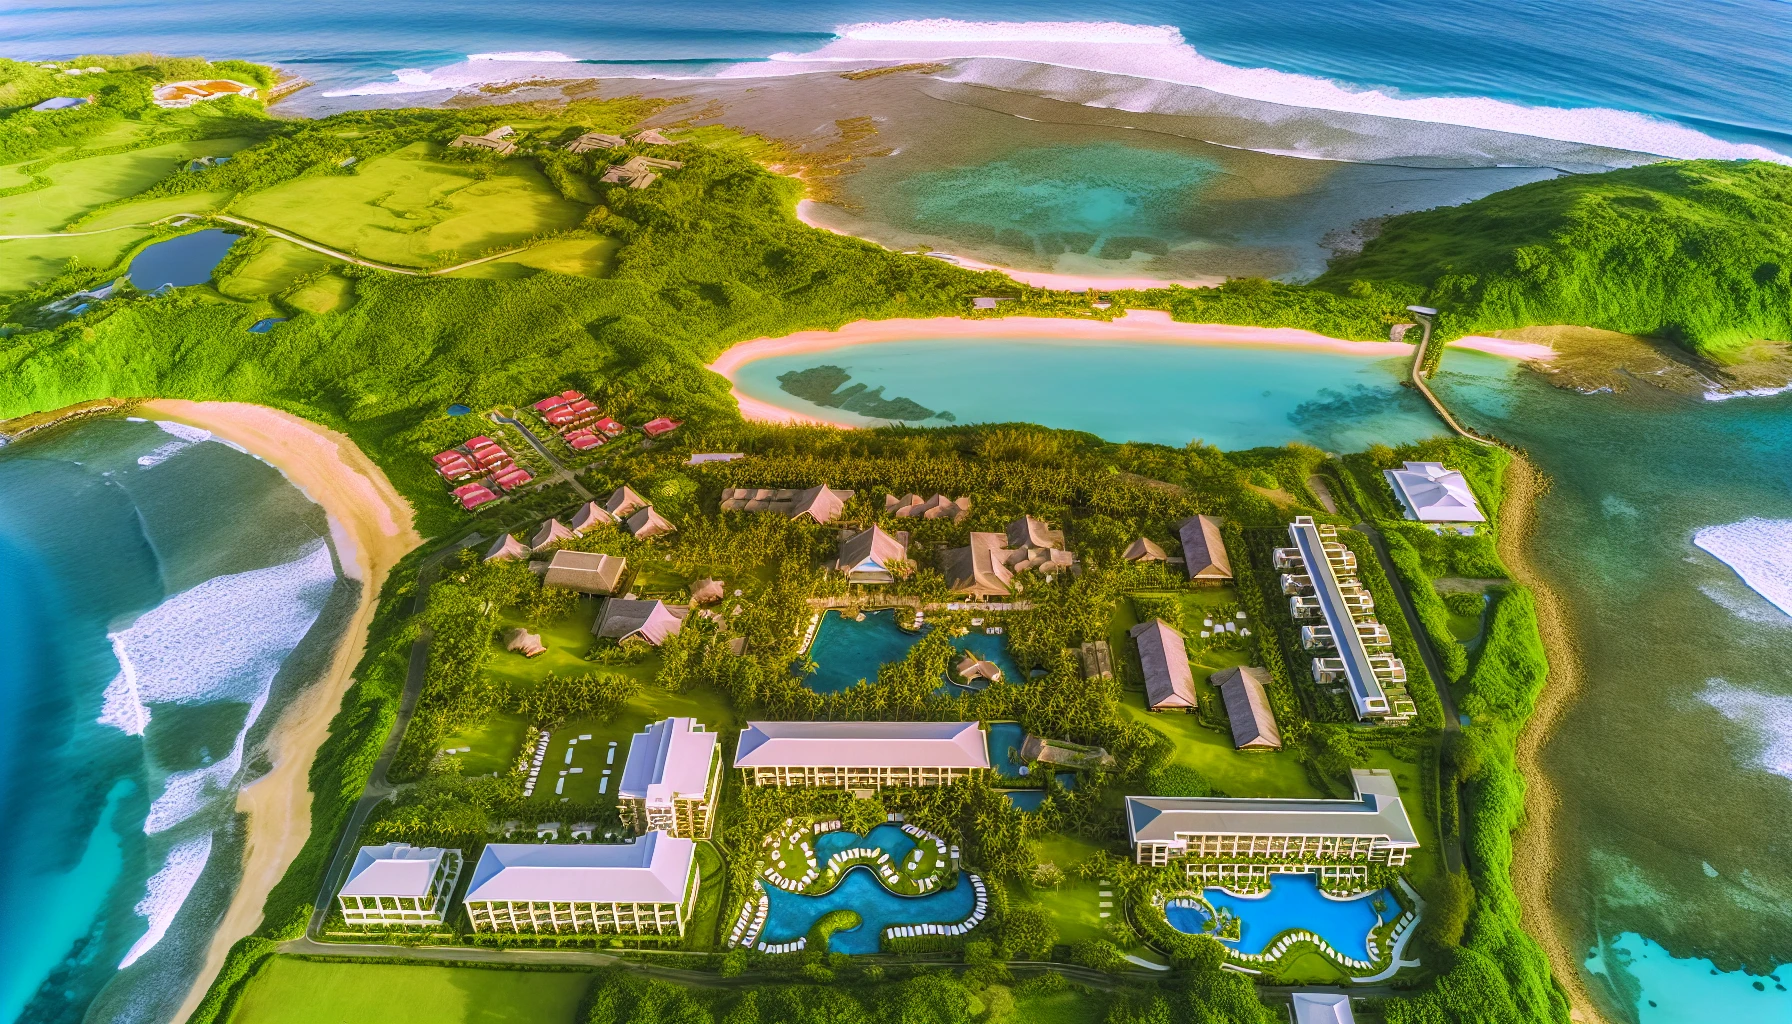 Aerial view of Westin Reserva Conchal nestled in lush Costa Rican landscape